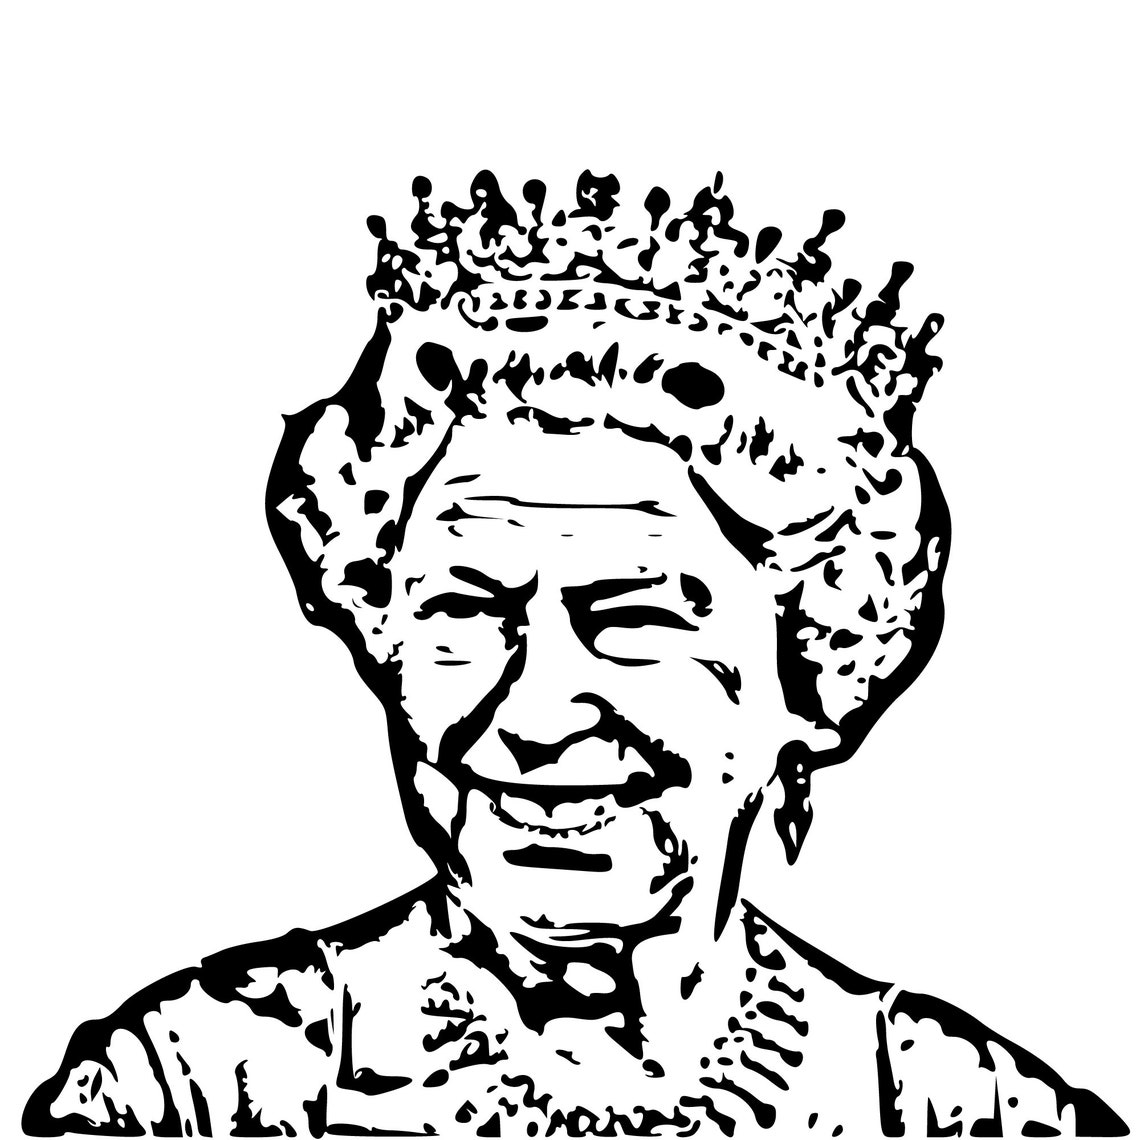 Queen Elizabeth and Royal Family Coloring Pages With SVG Files - Etsy